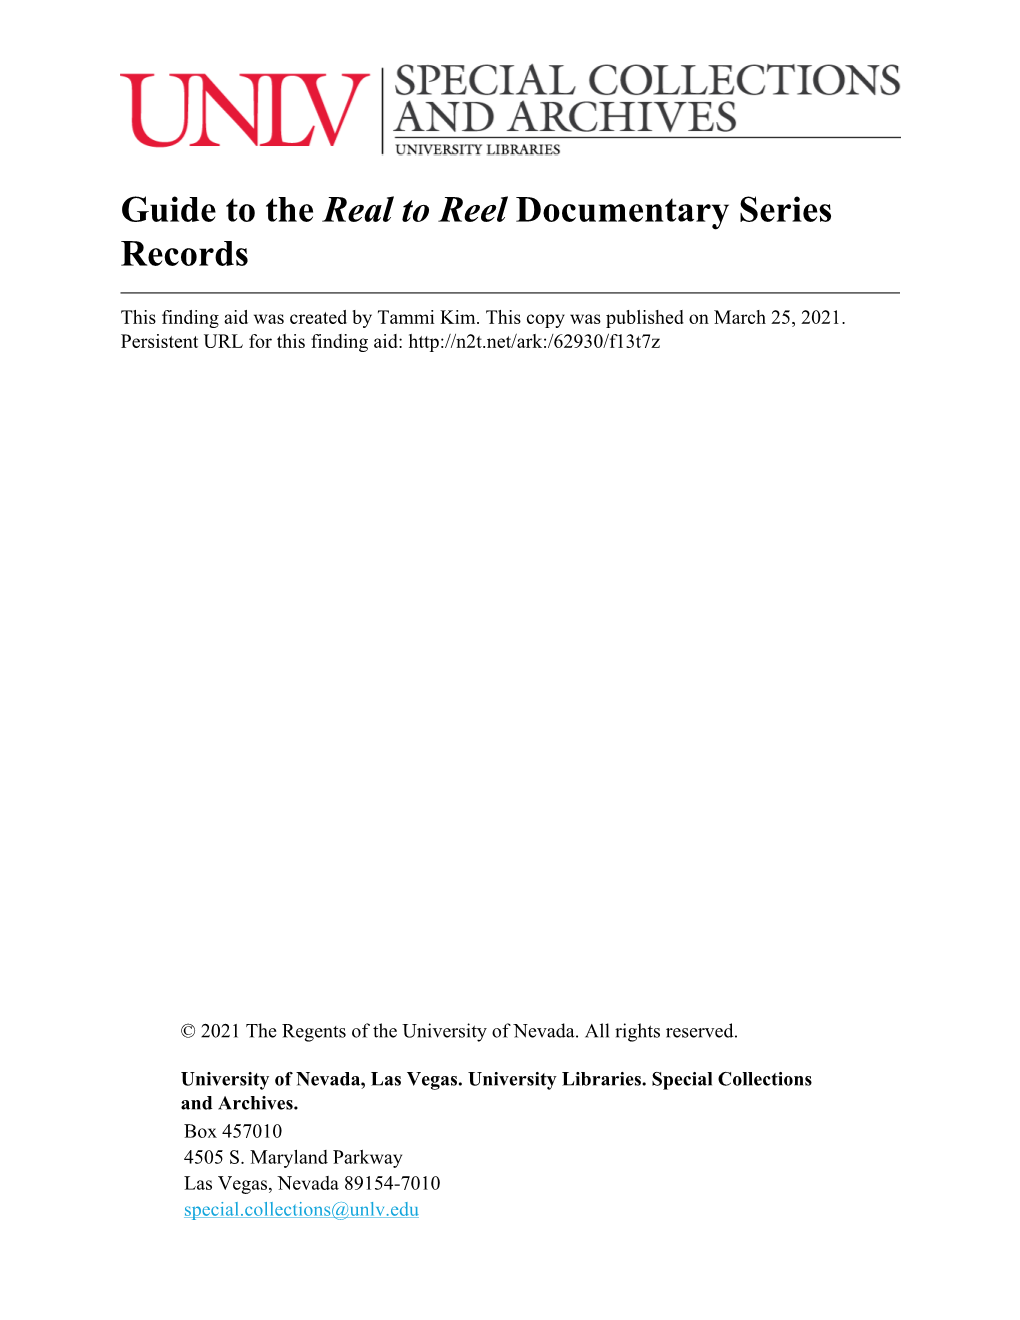 Guide to the Real to Reel Documentary Series Records